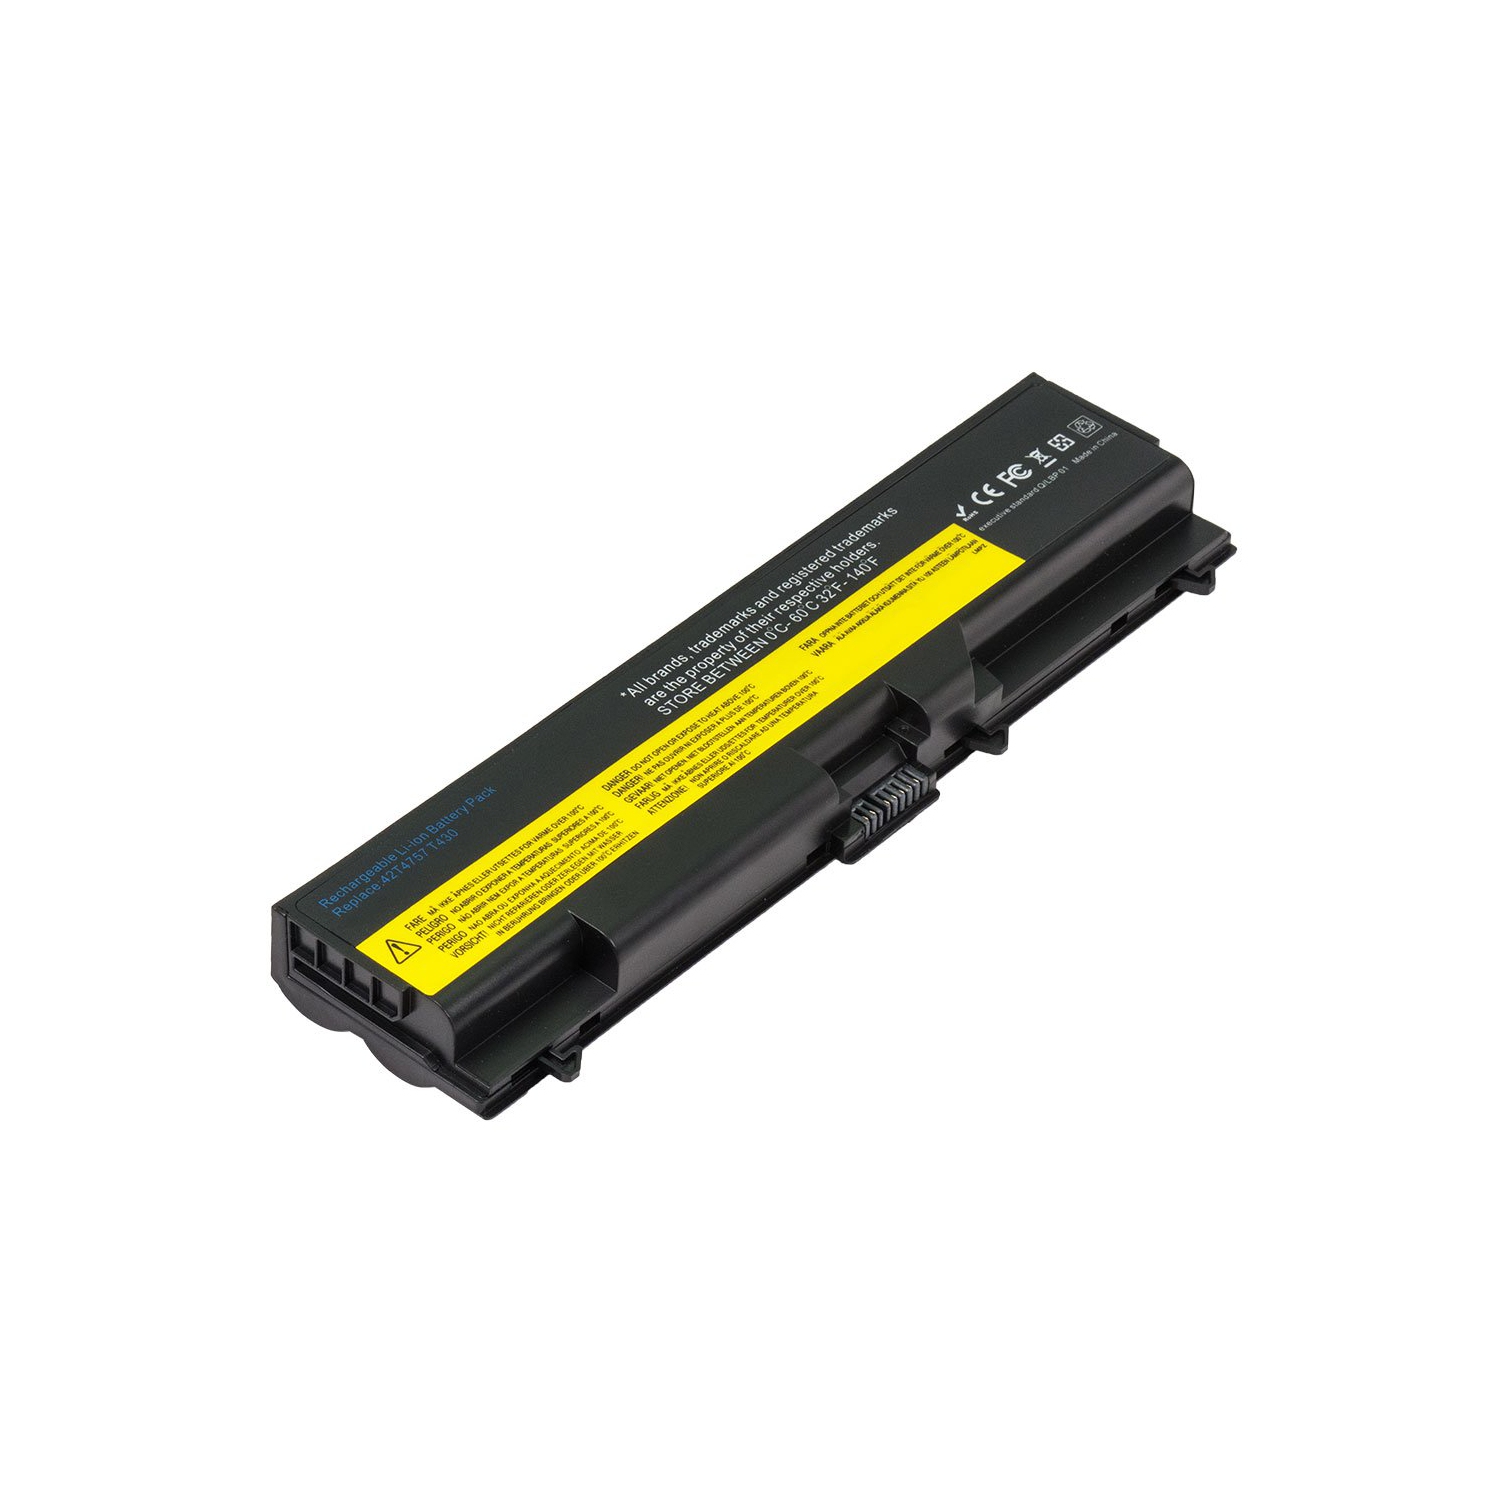 Laptop Battery Replacement for Lenovo ThinkPad W530 2441, 42T4712, 42T4737, 42T4763, 42T4797, 42T4921, 0A36303